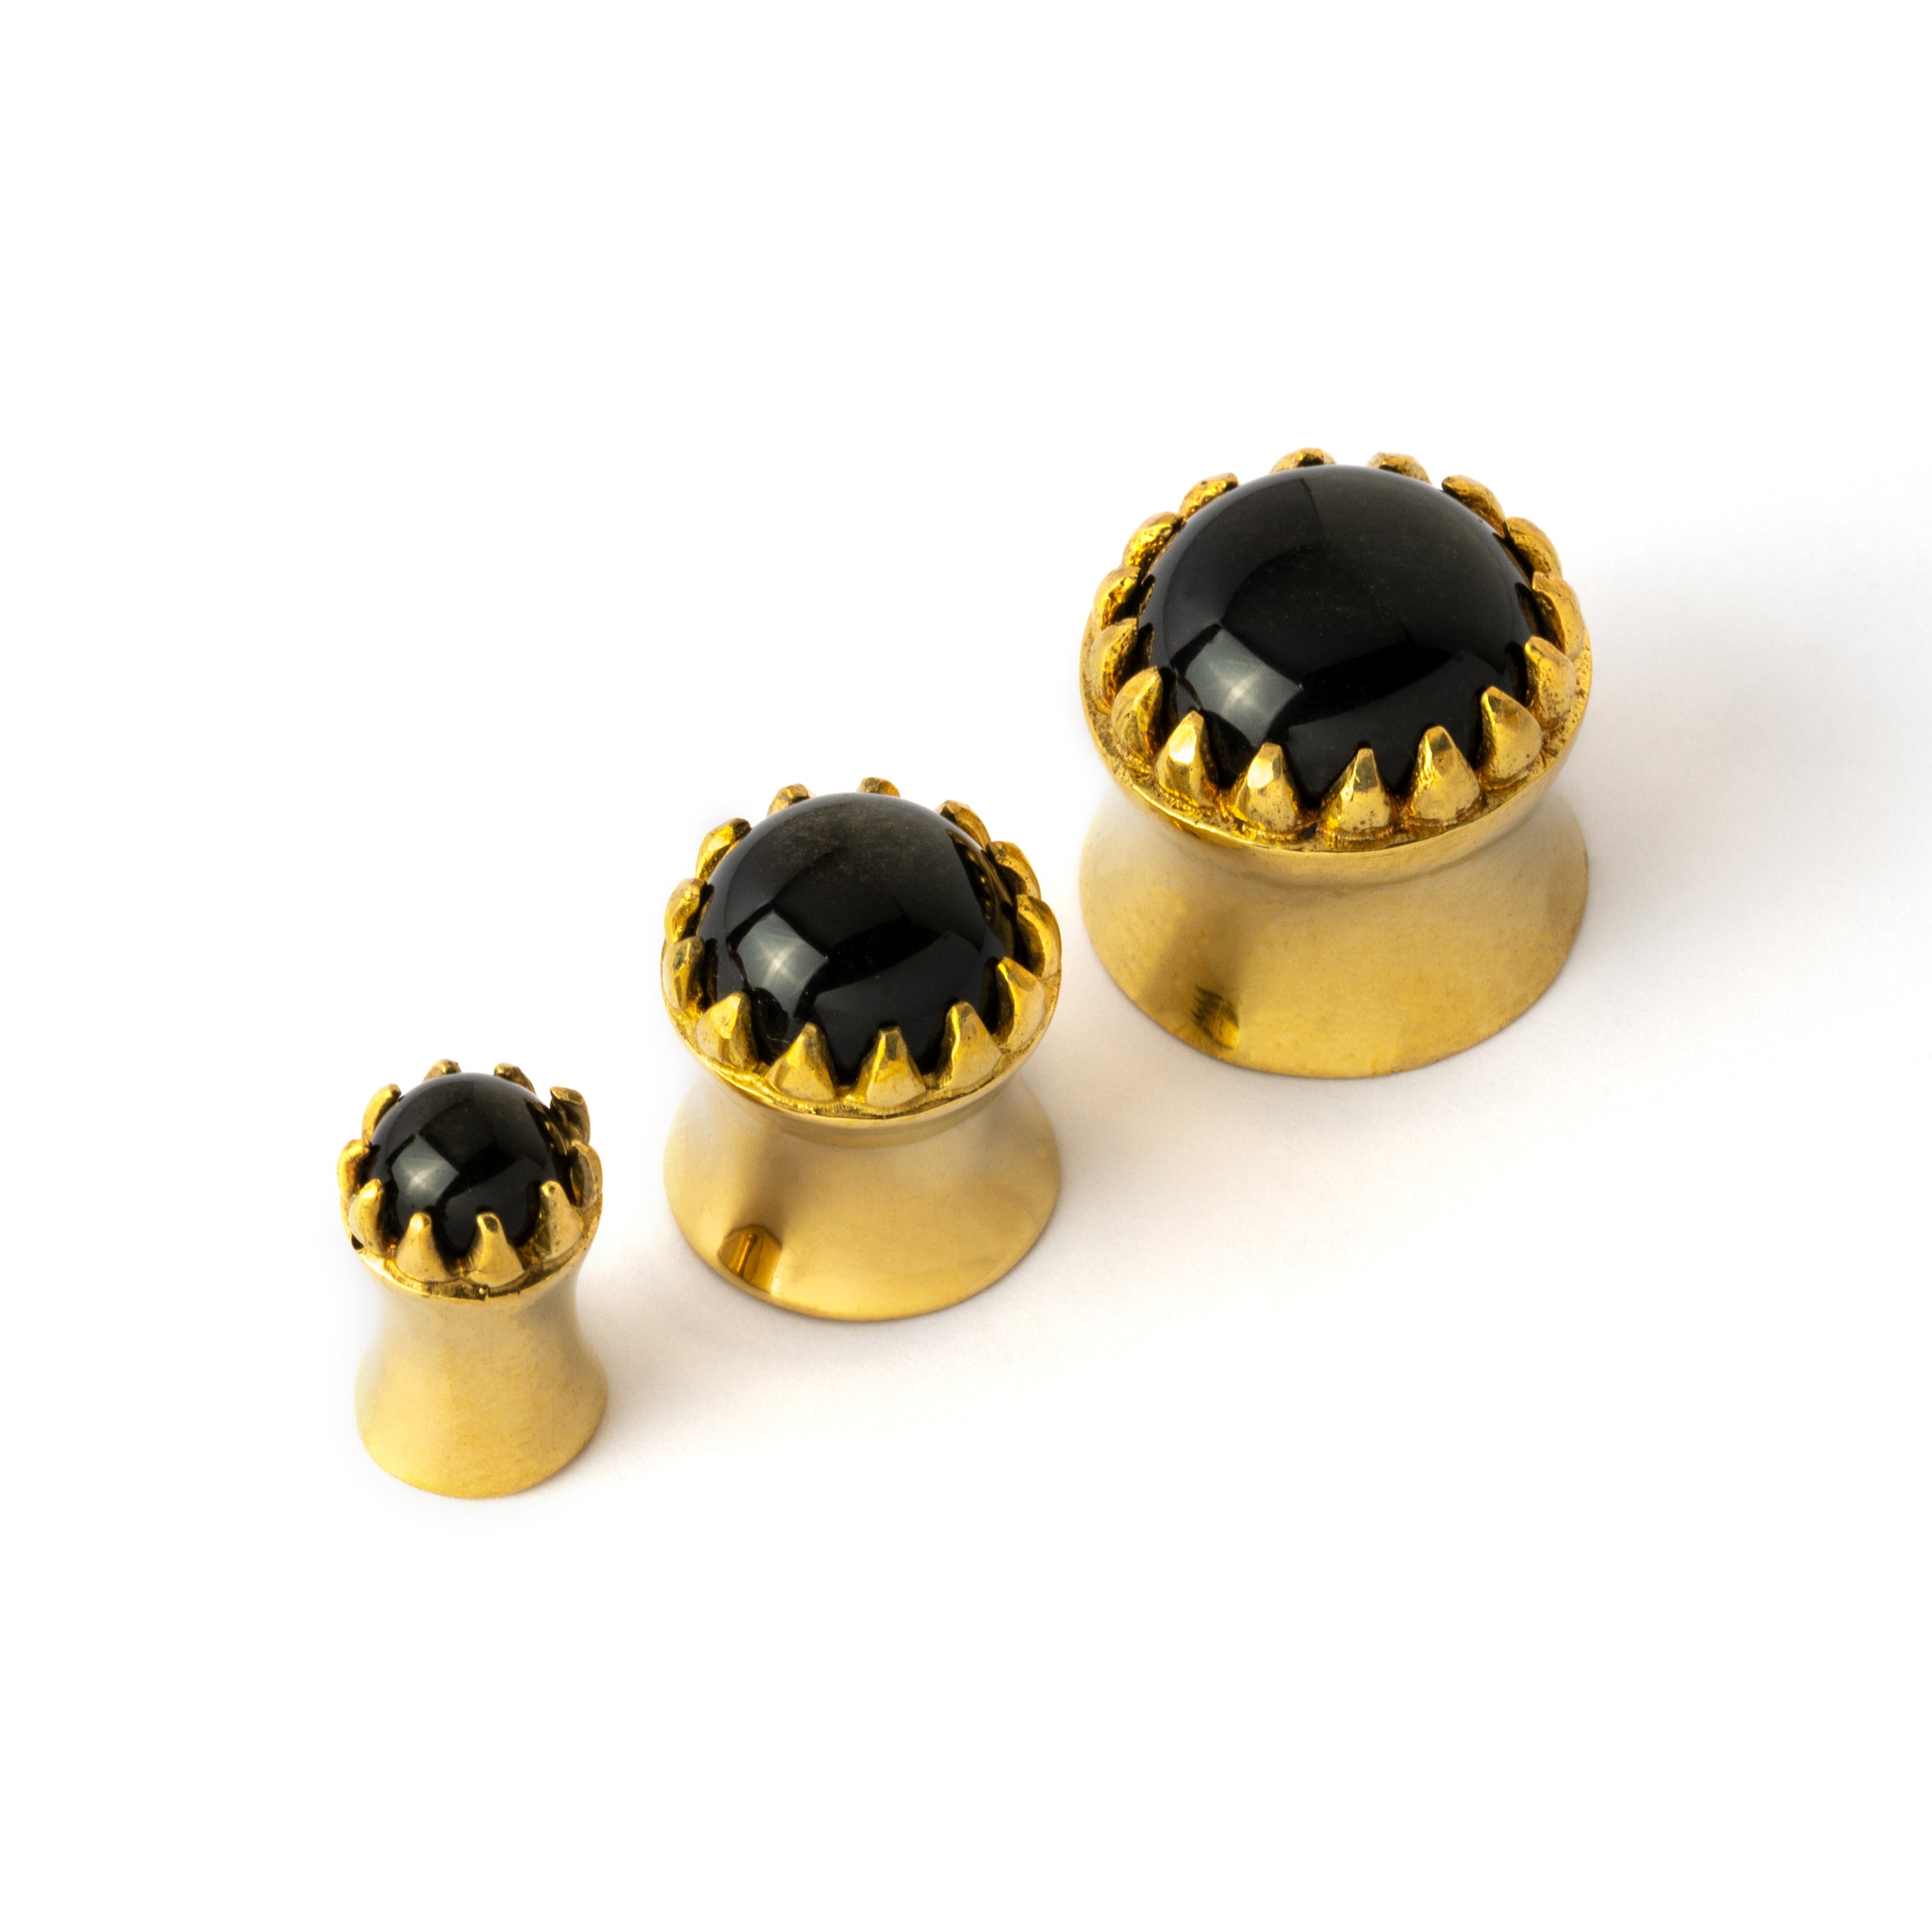 golden ear plug crown shaped with centred black obsidian stone in variety of sizes 